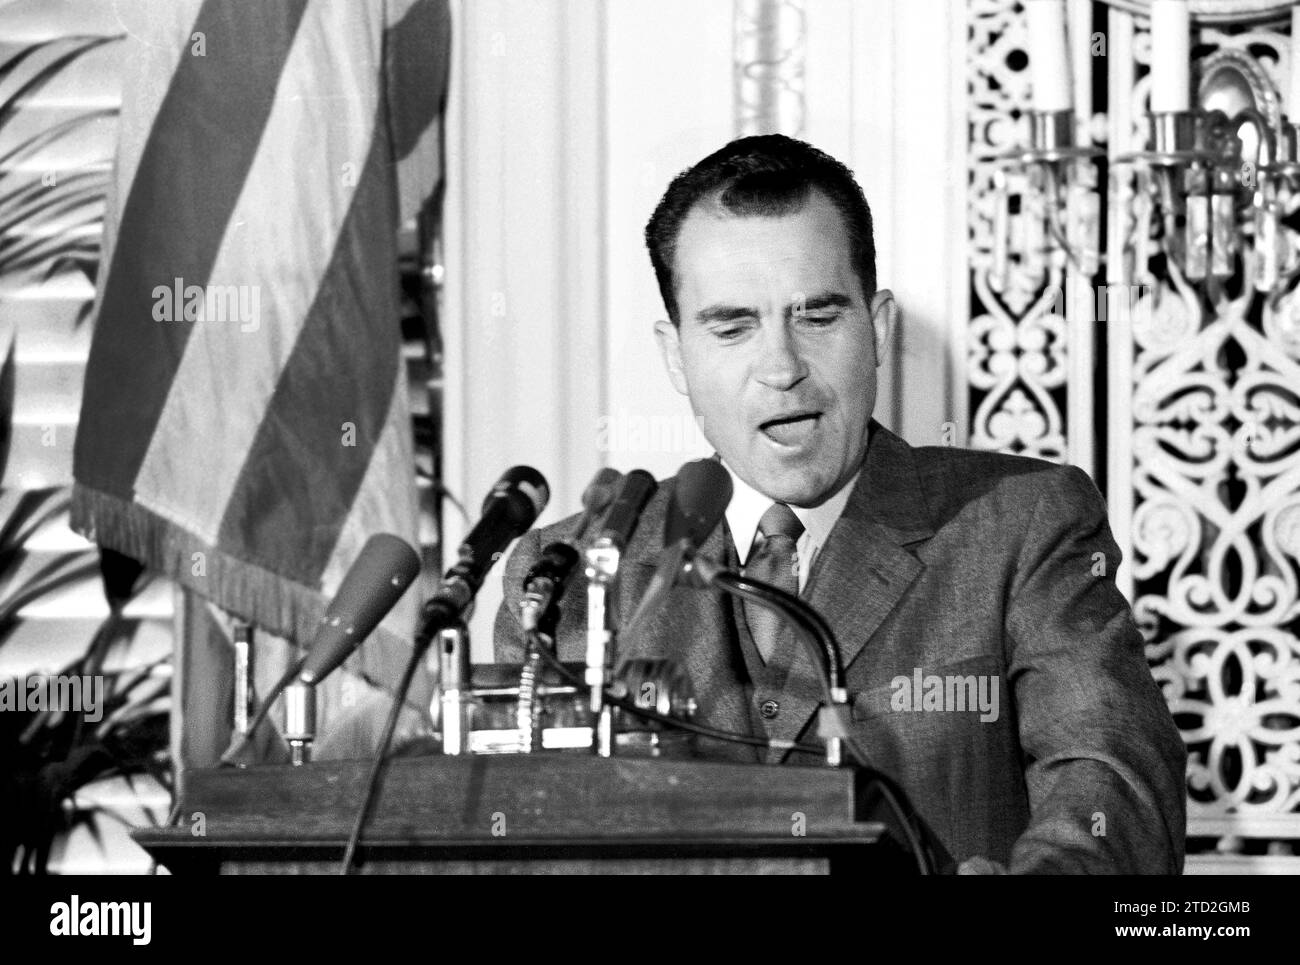 U.S. Vice President Richard M. Nixon, speaking at the National Press Club after his trip to South America, Washington, D.C., USA, Marion S. Trikosko, U.S. News & World Report Magazine Photograph Collection, May 21, 1958 Stock Photo